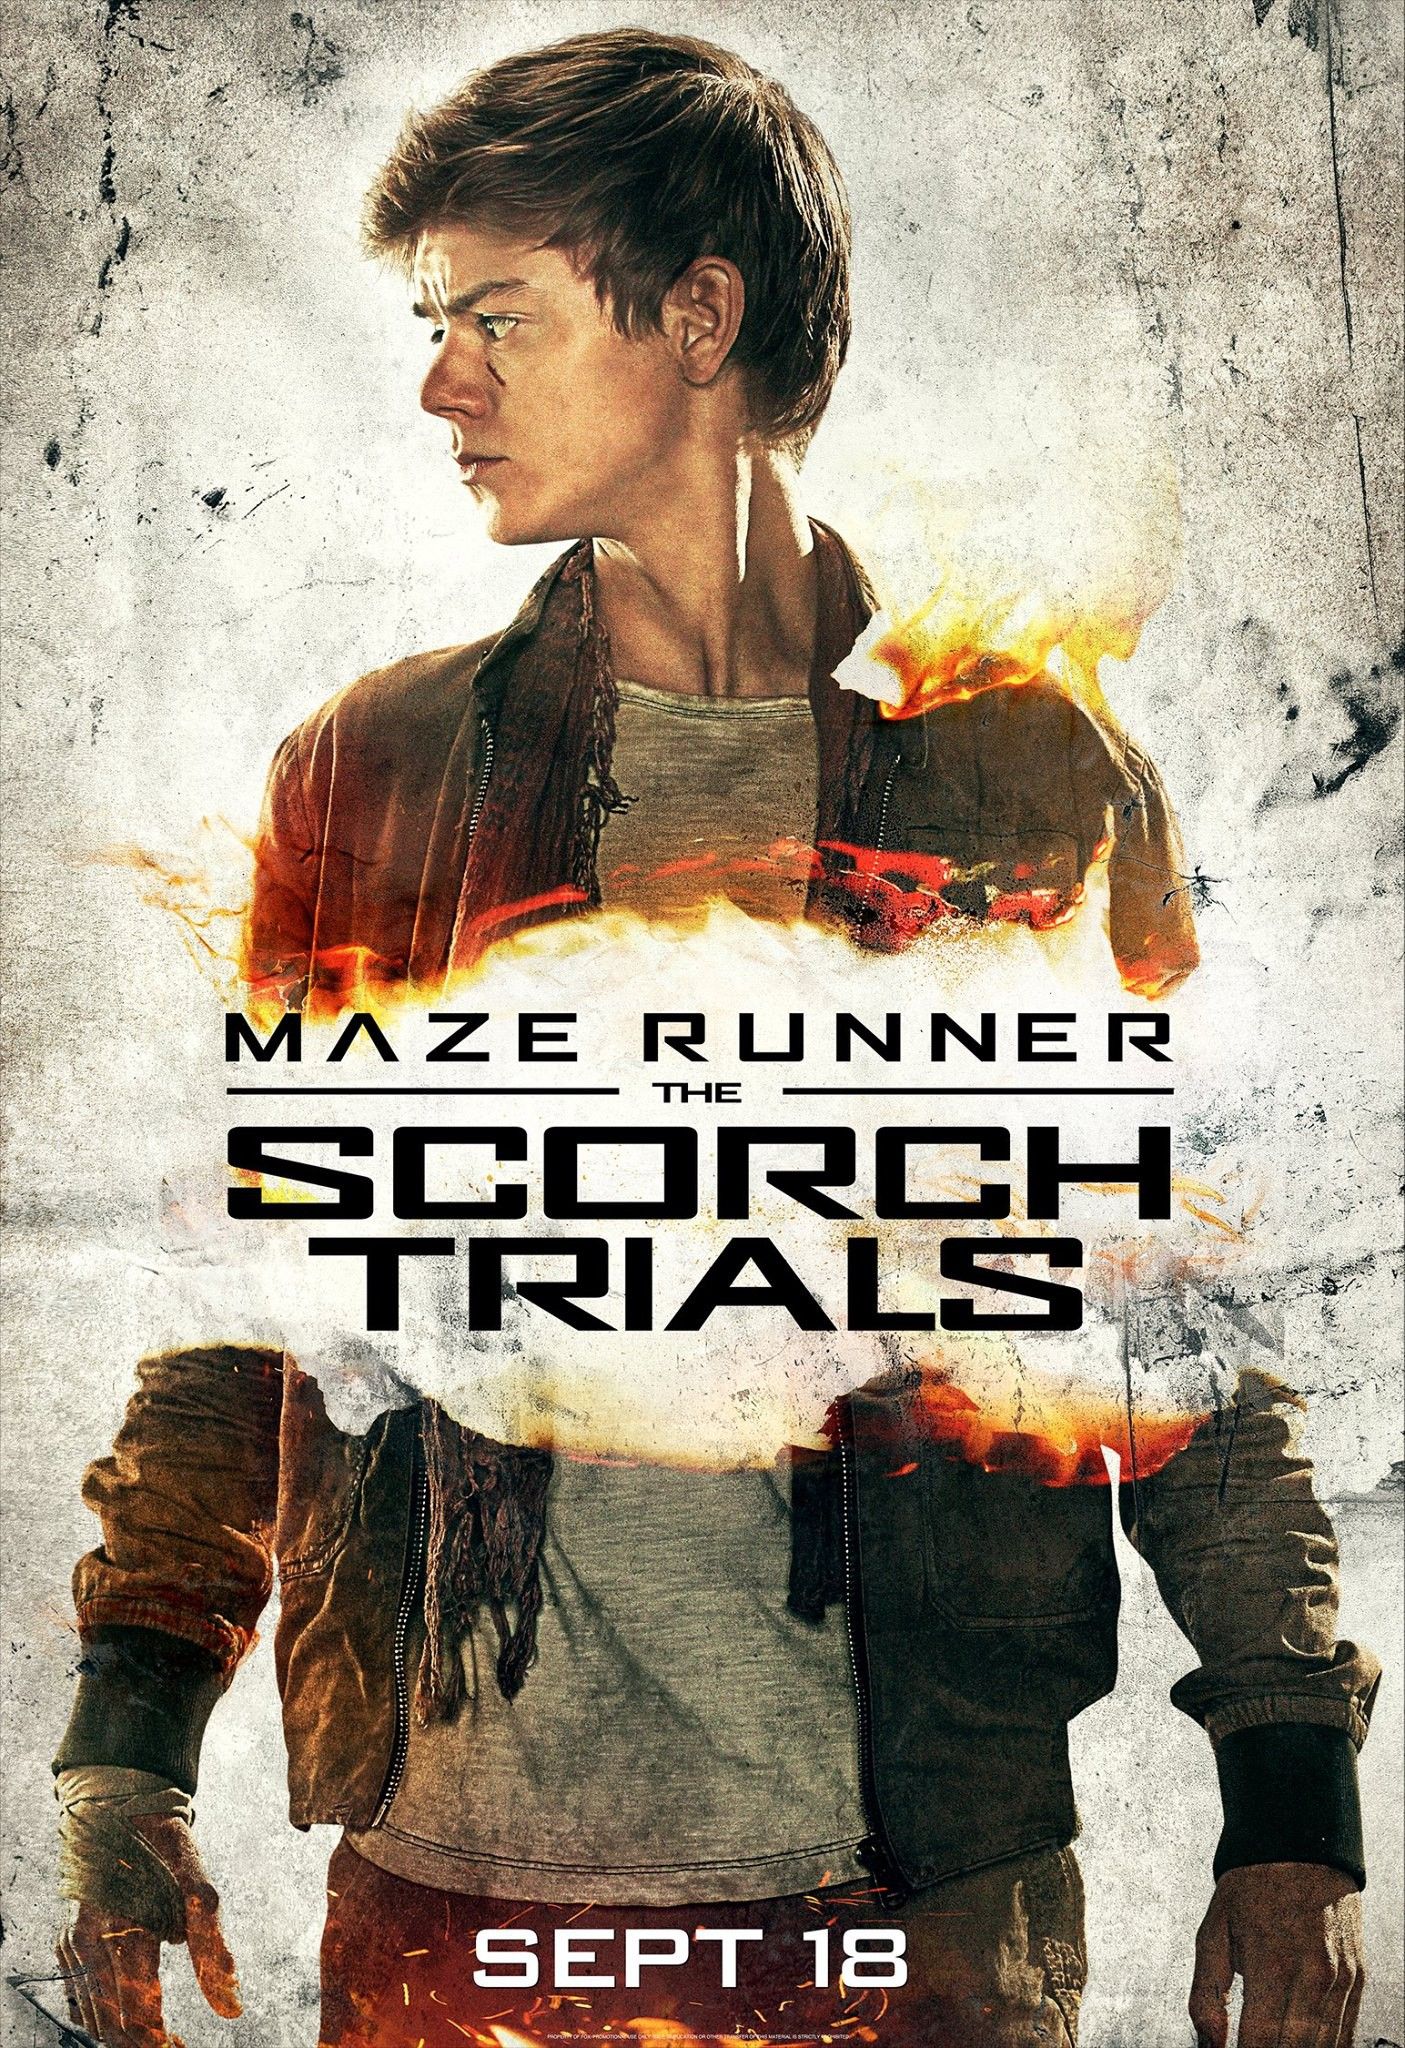 The Maze Runner Scorch Trials Character Poster 4